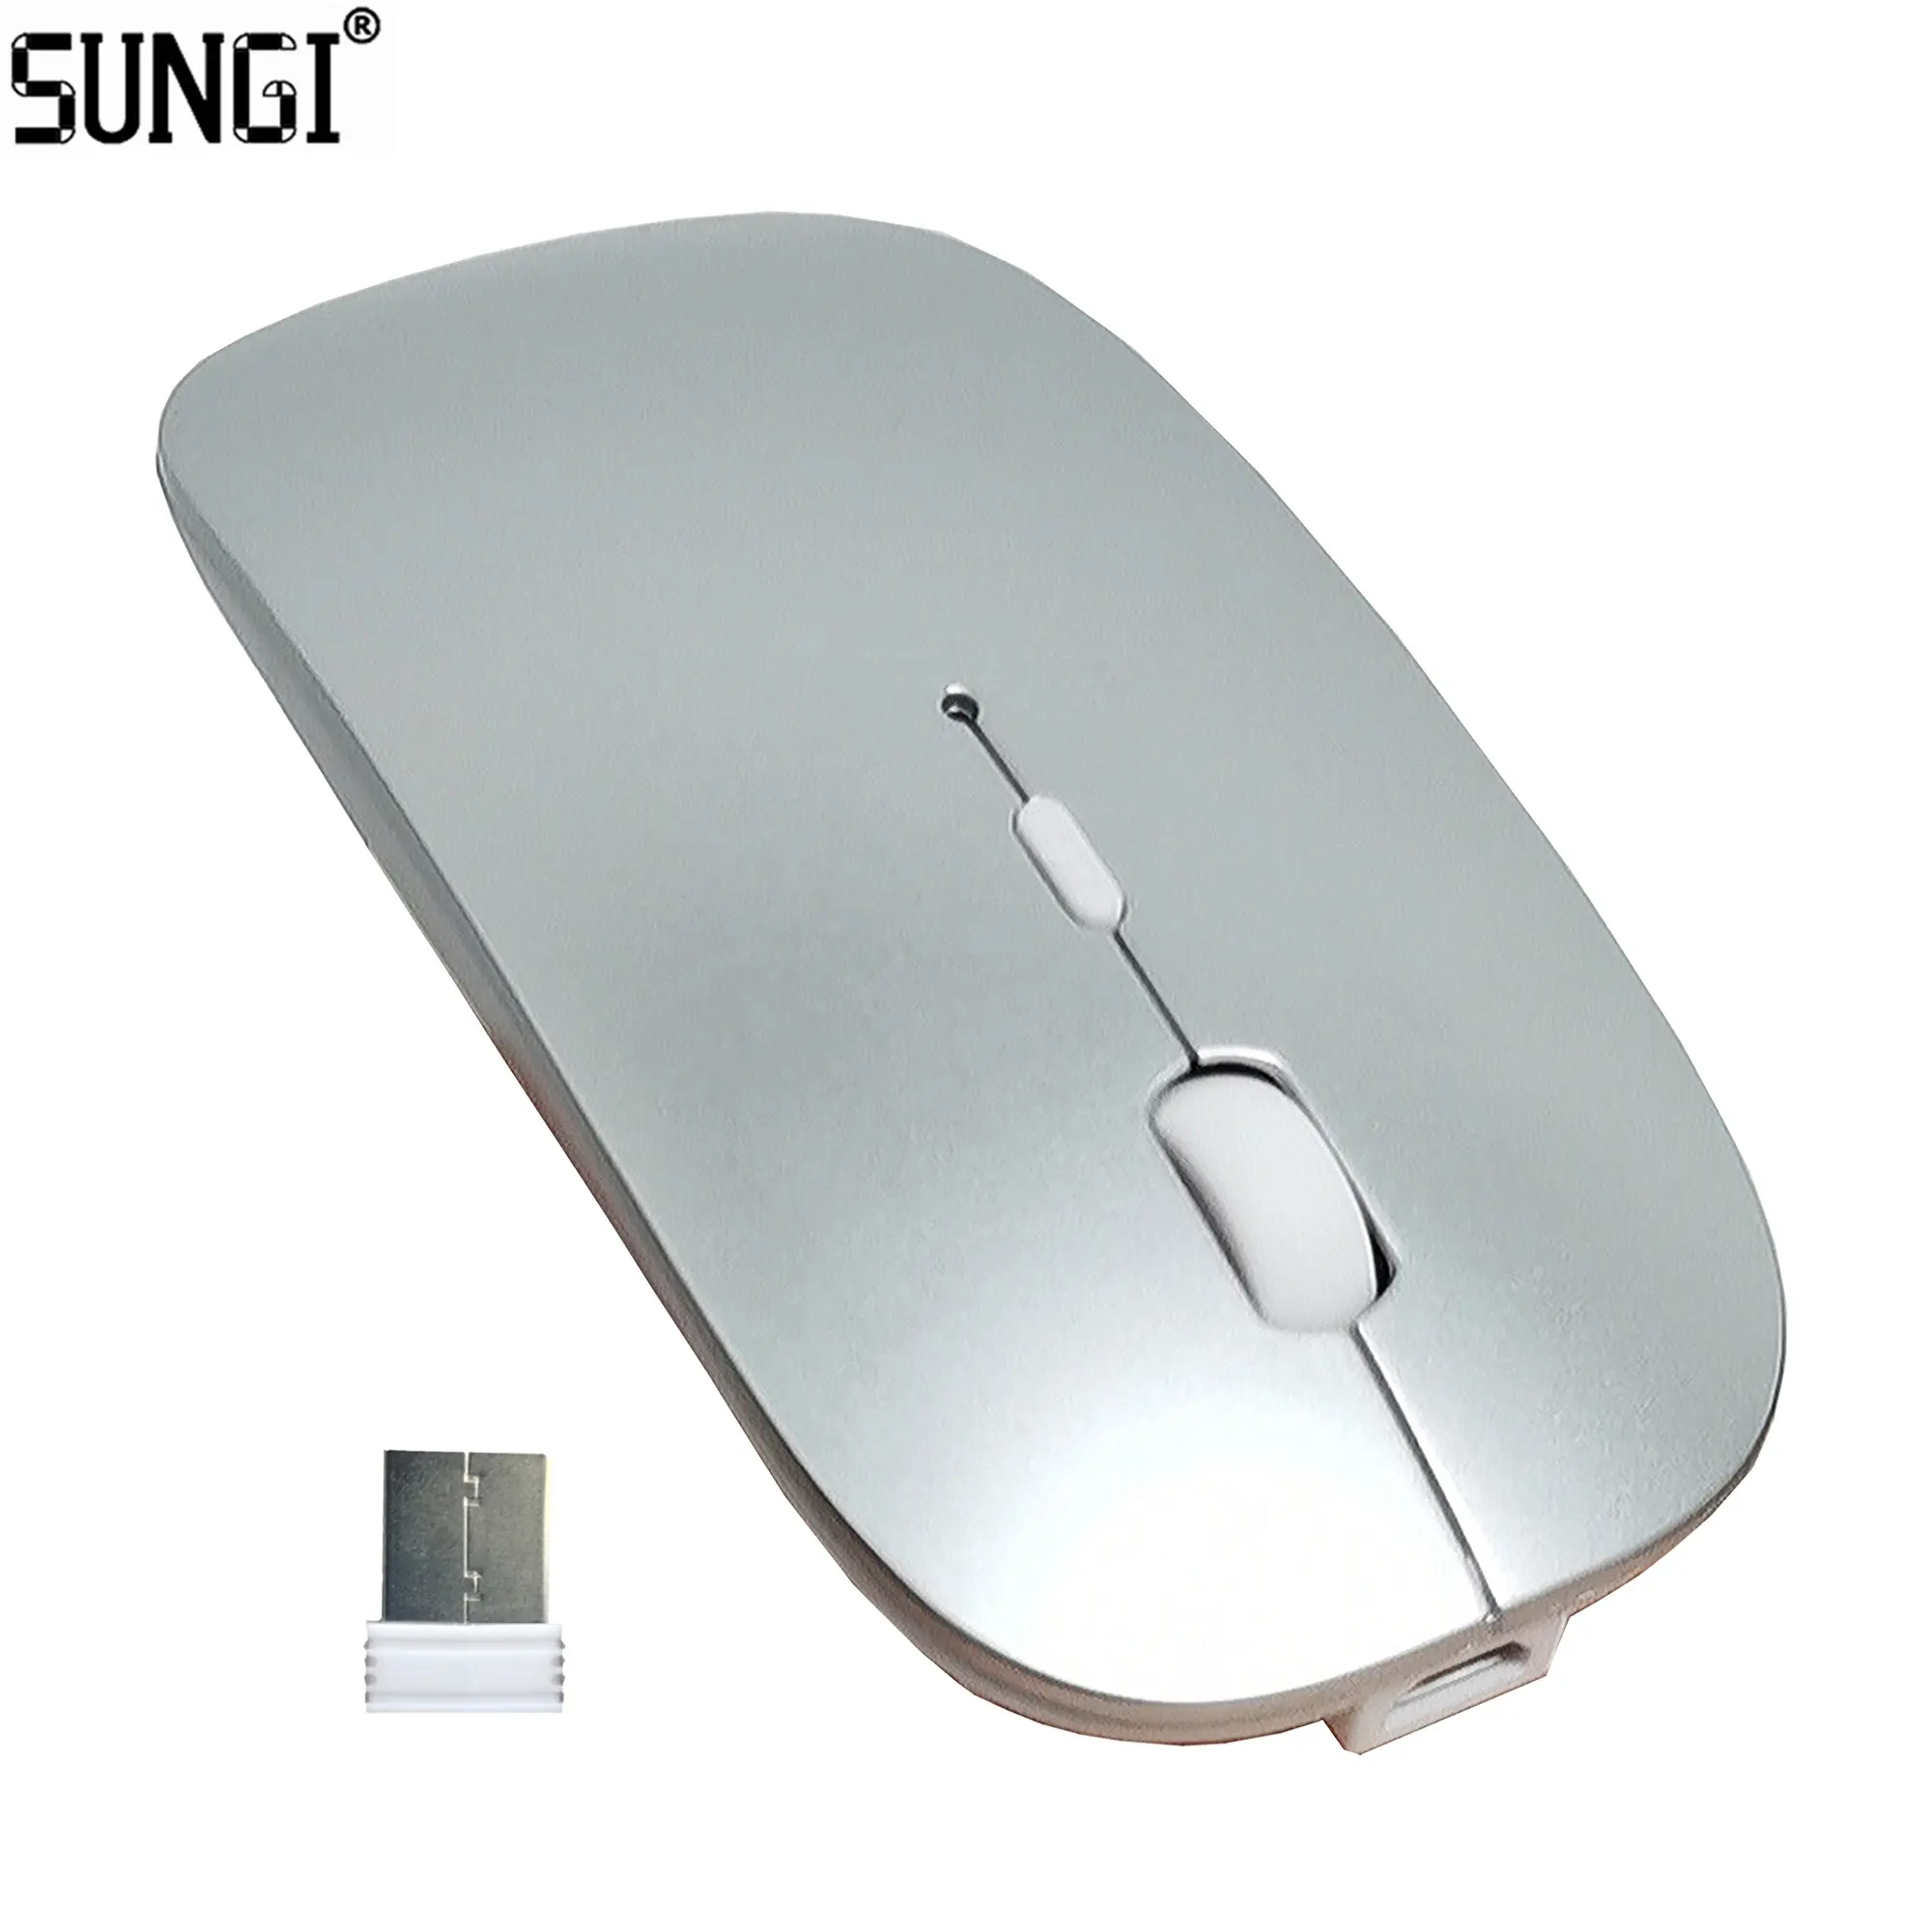 Silent Cordless Dual Mode Wireless BT Mouse Rechargeable 2.4G Wifi and Bluetooths Mouse for iPhone iPad Macbook